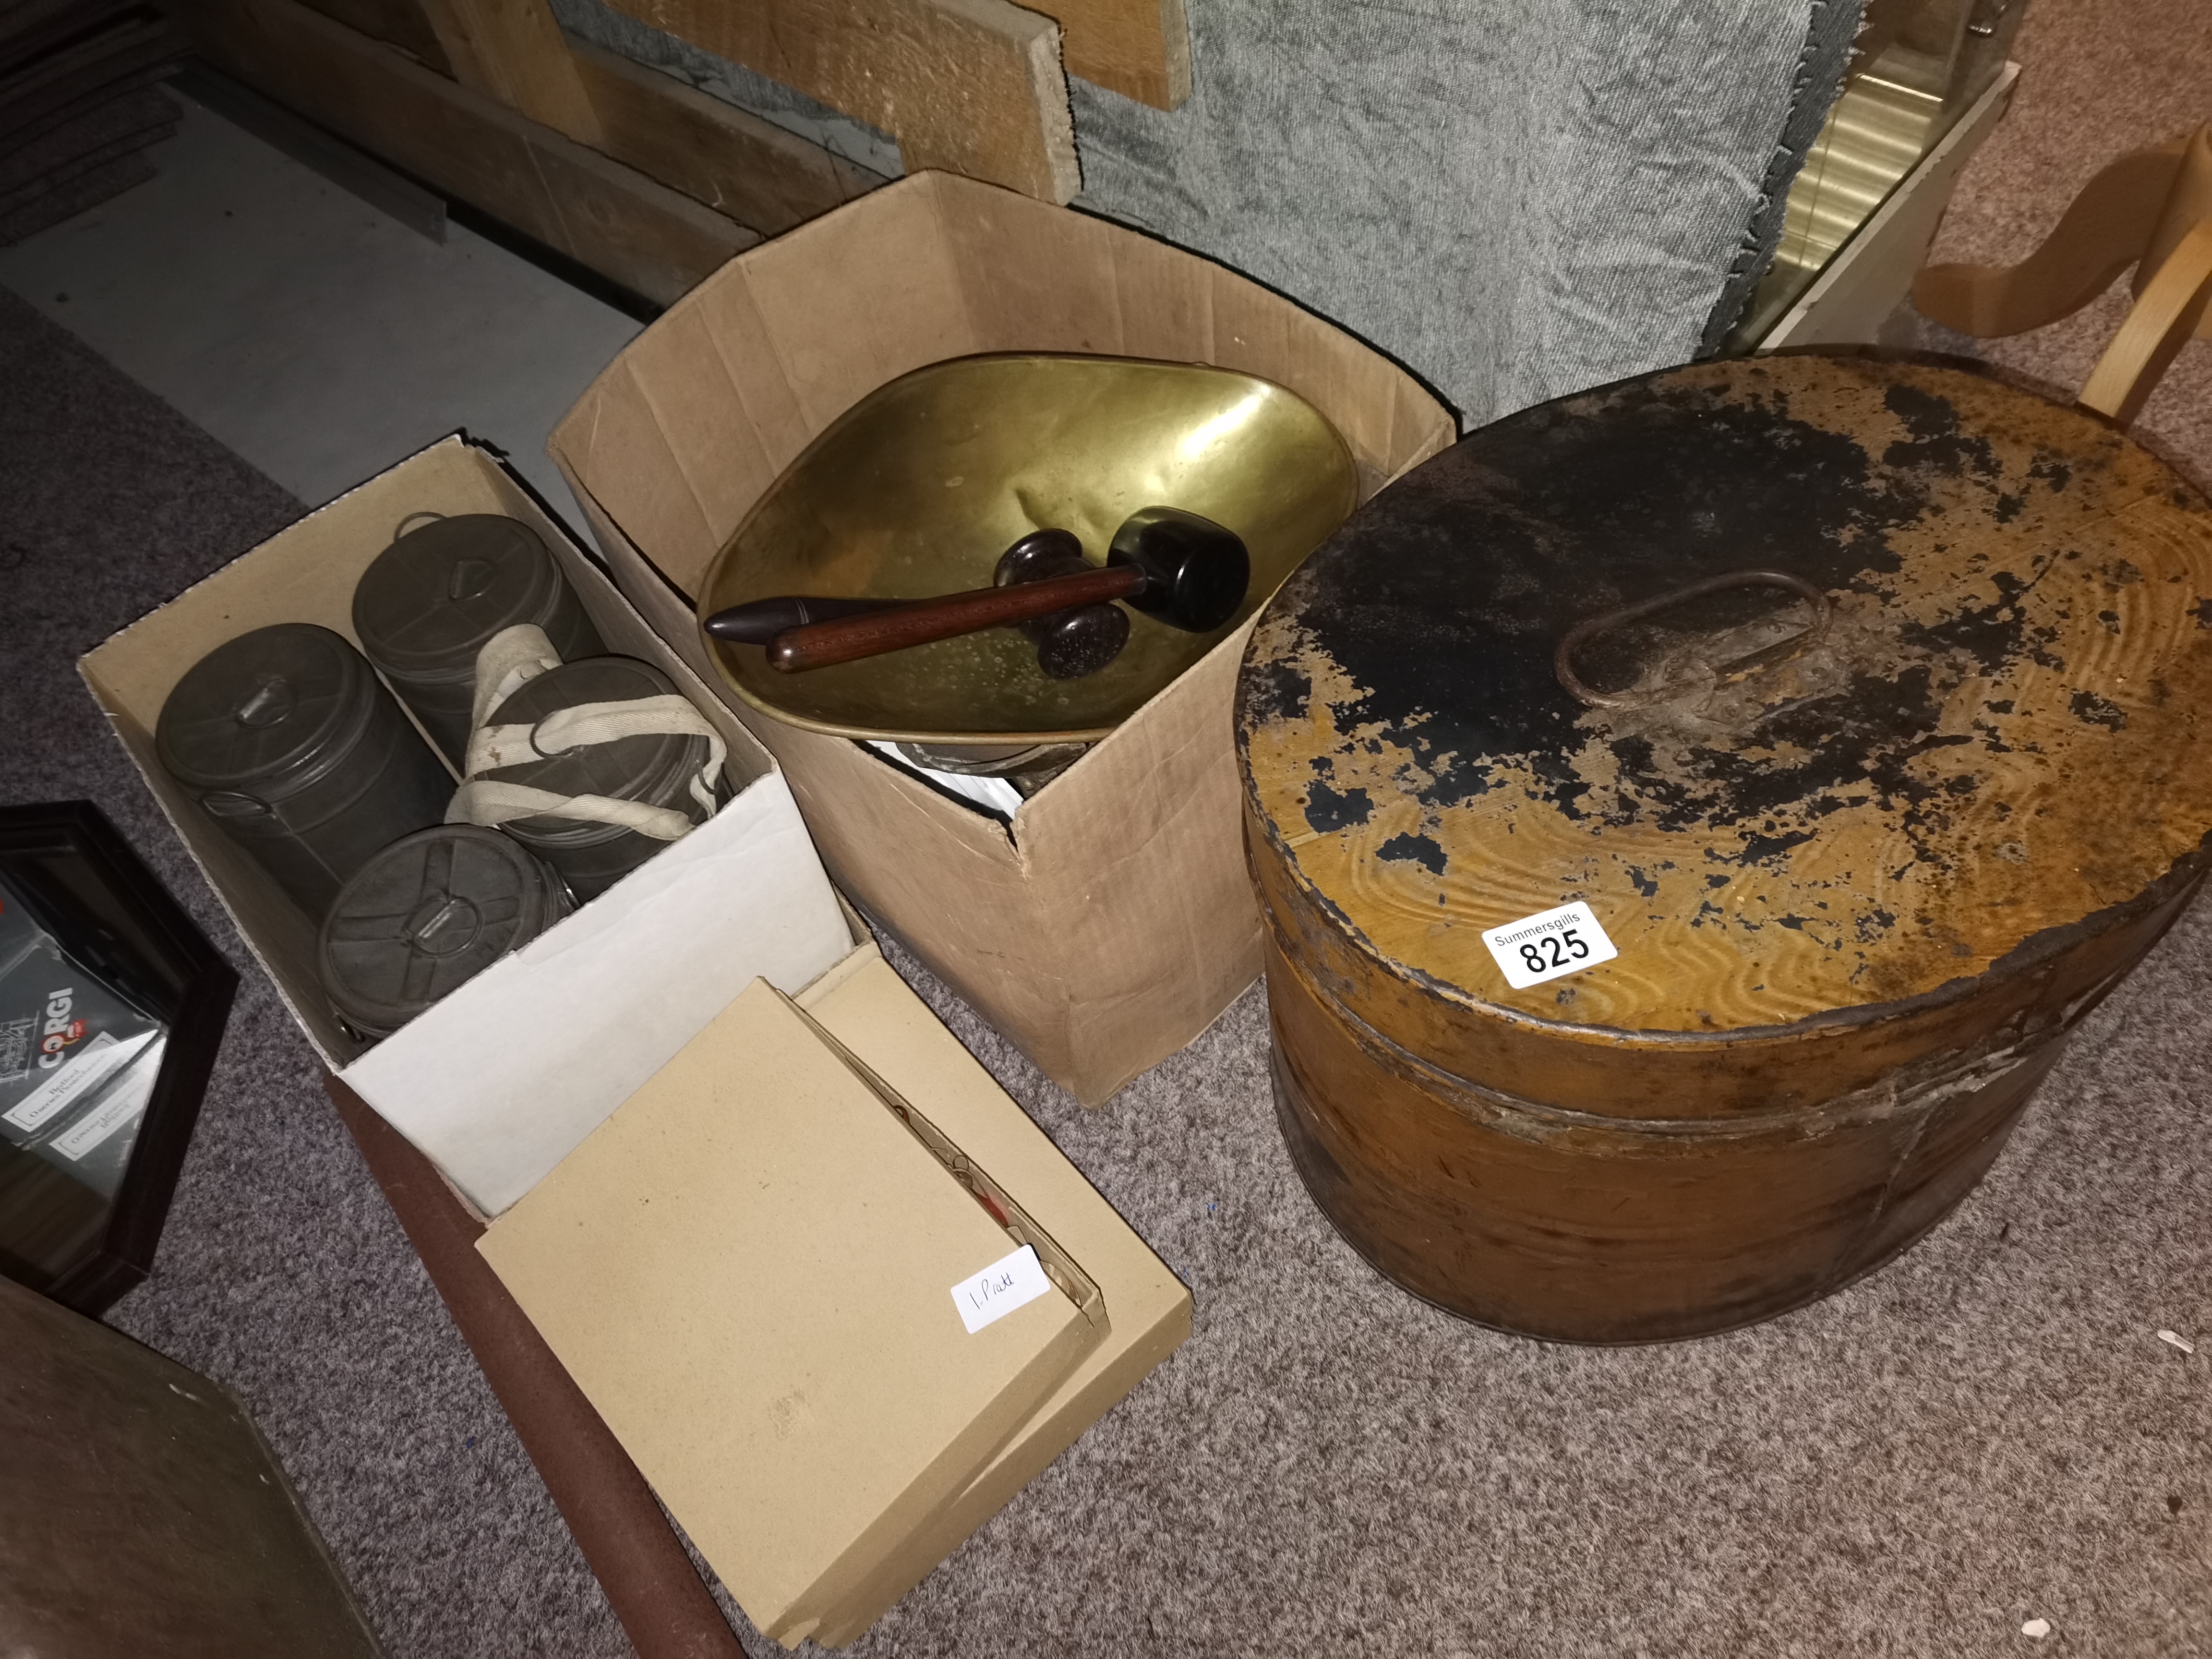 Christmas baubles, auction hammers, tin box